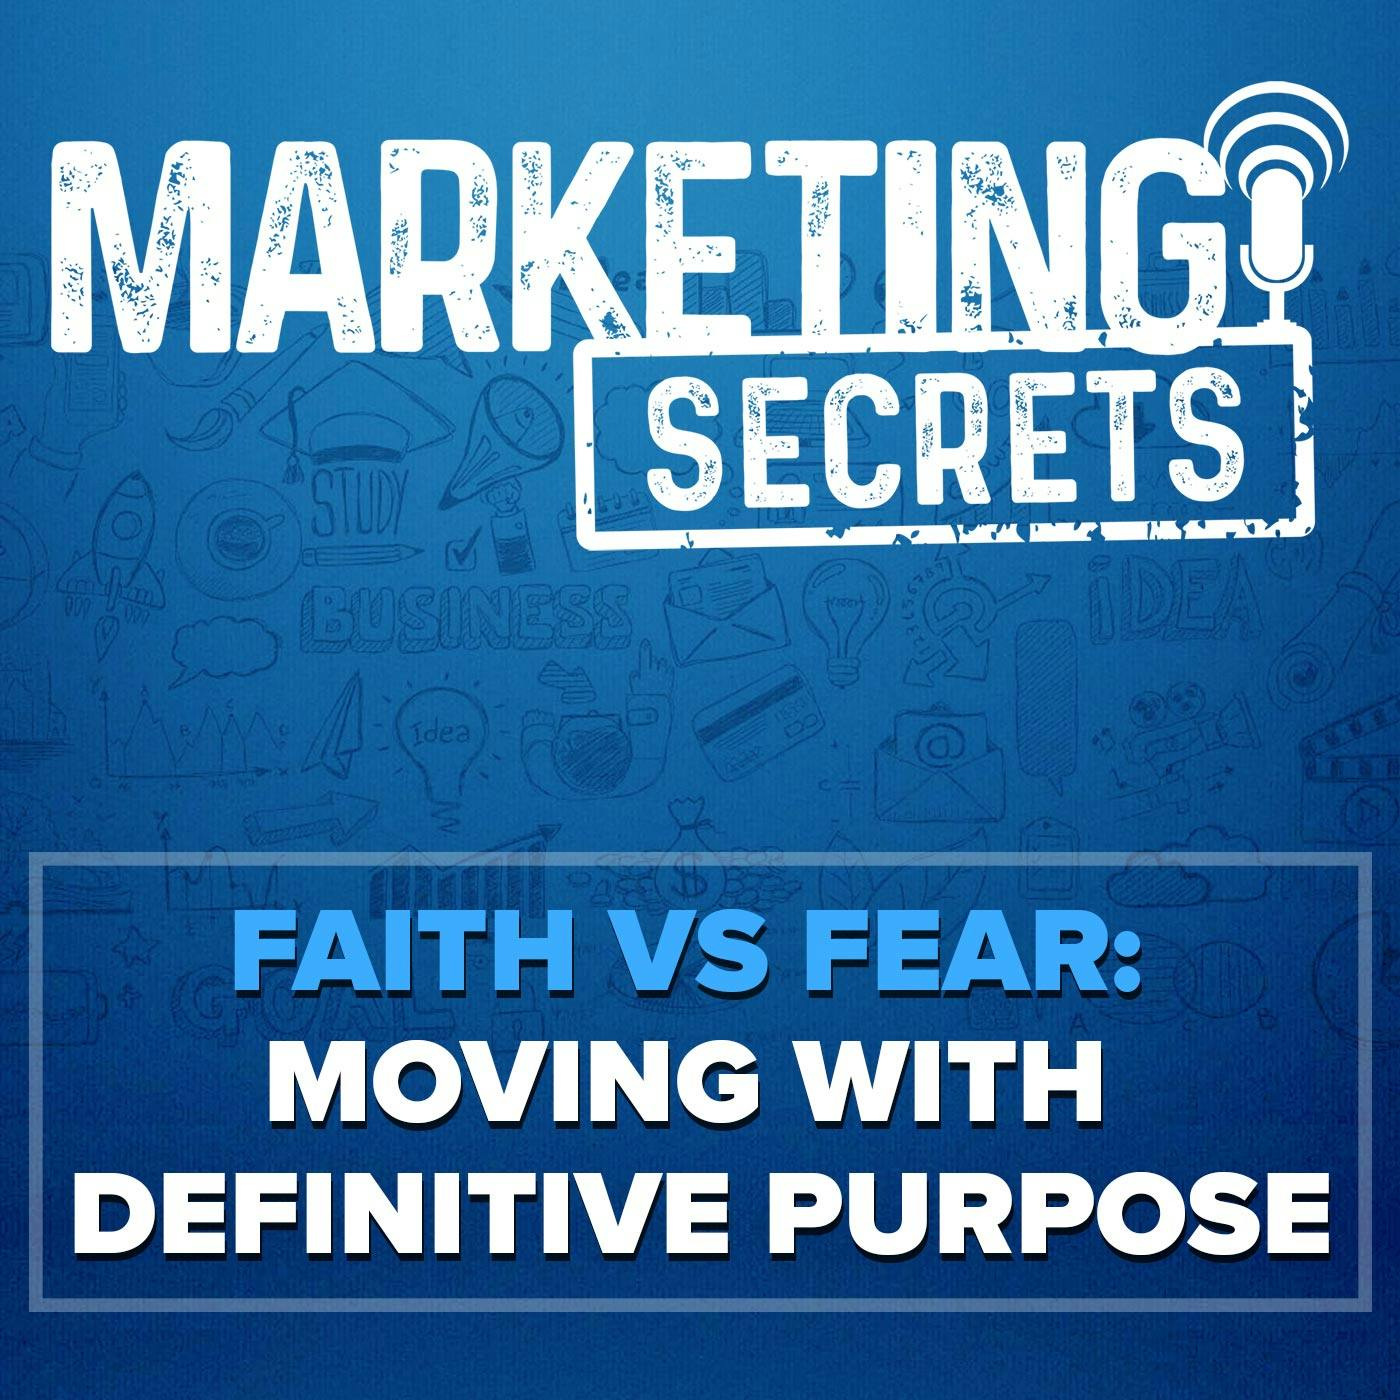 Faith Vs Fear: Moving With Definitive Purpose